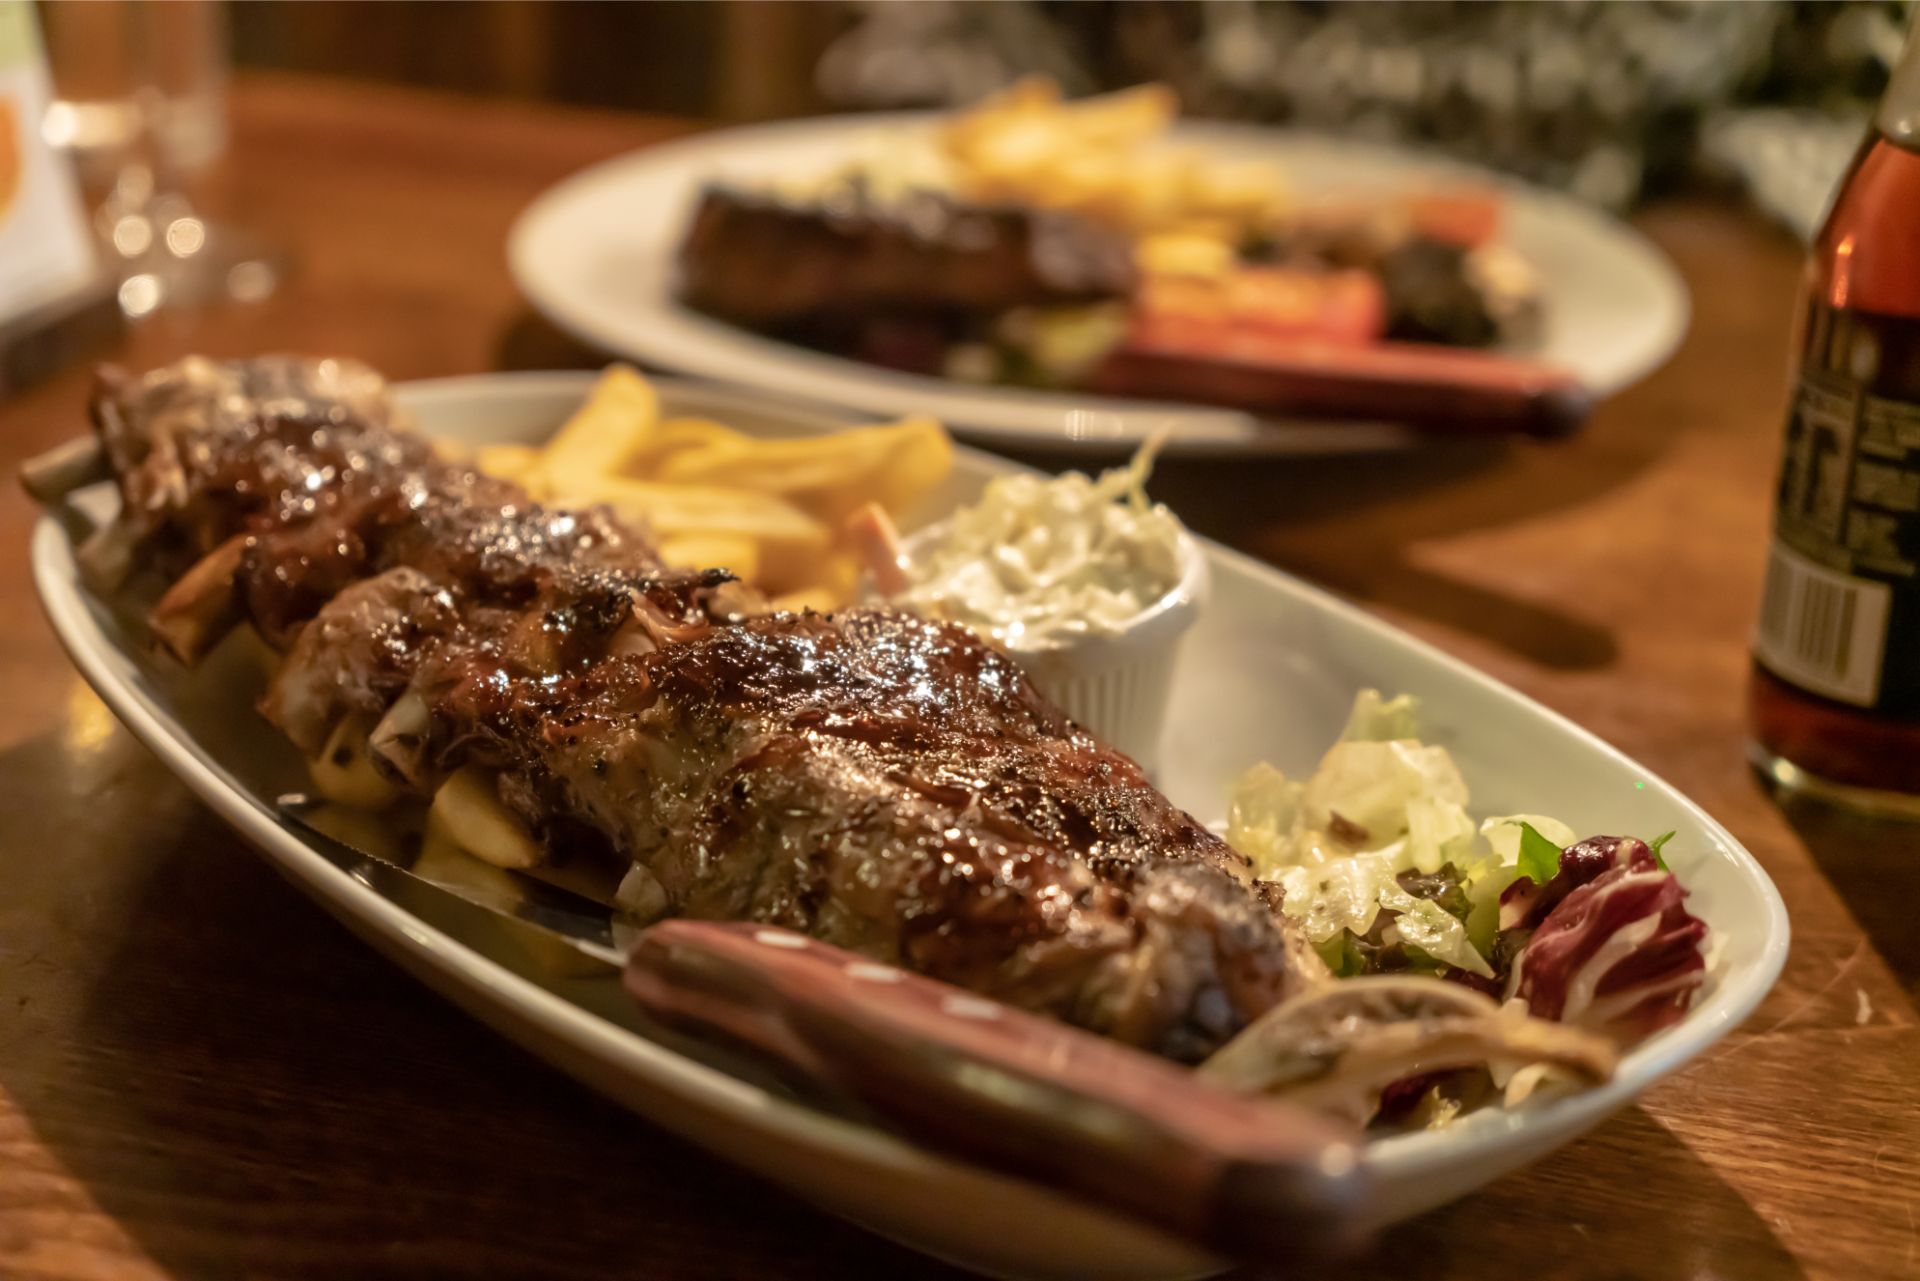 ribs-main-meal-dinner-at-the-beaufort-arms-pub-the-gower-wales